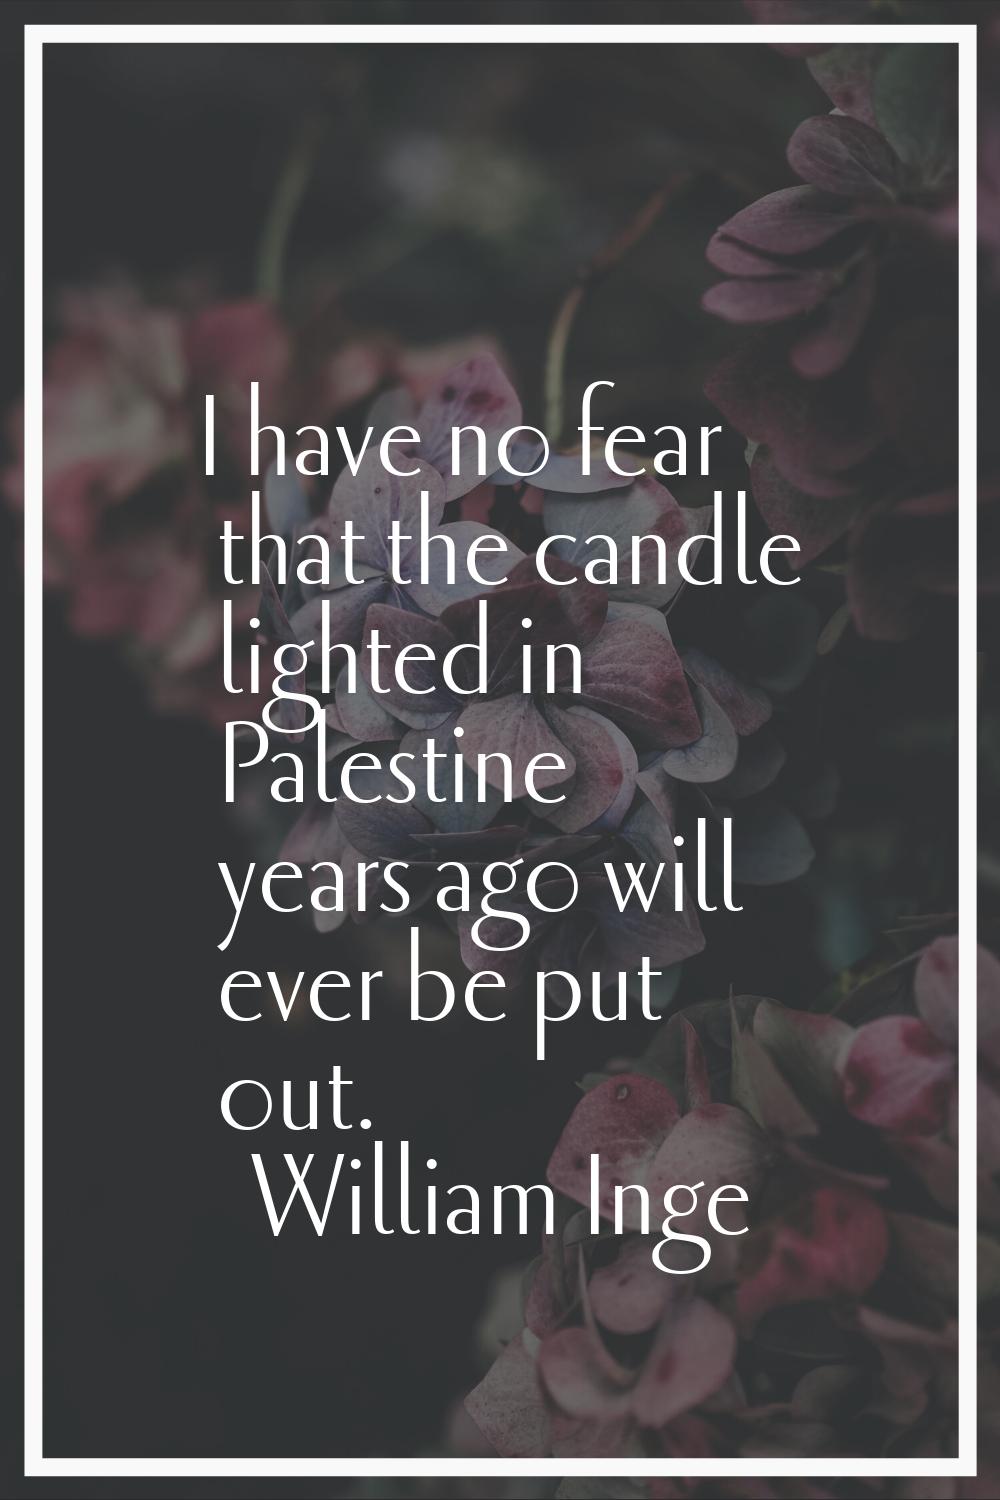 I have no fear that the candle lighted in Palestine years ago will ever be put out.